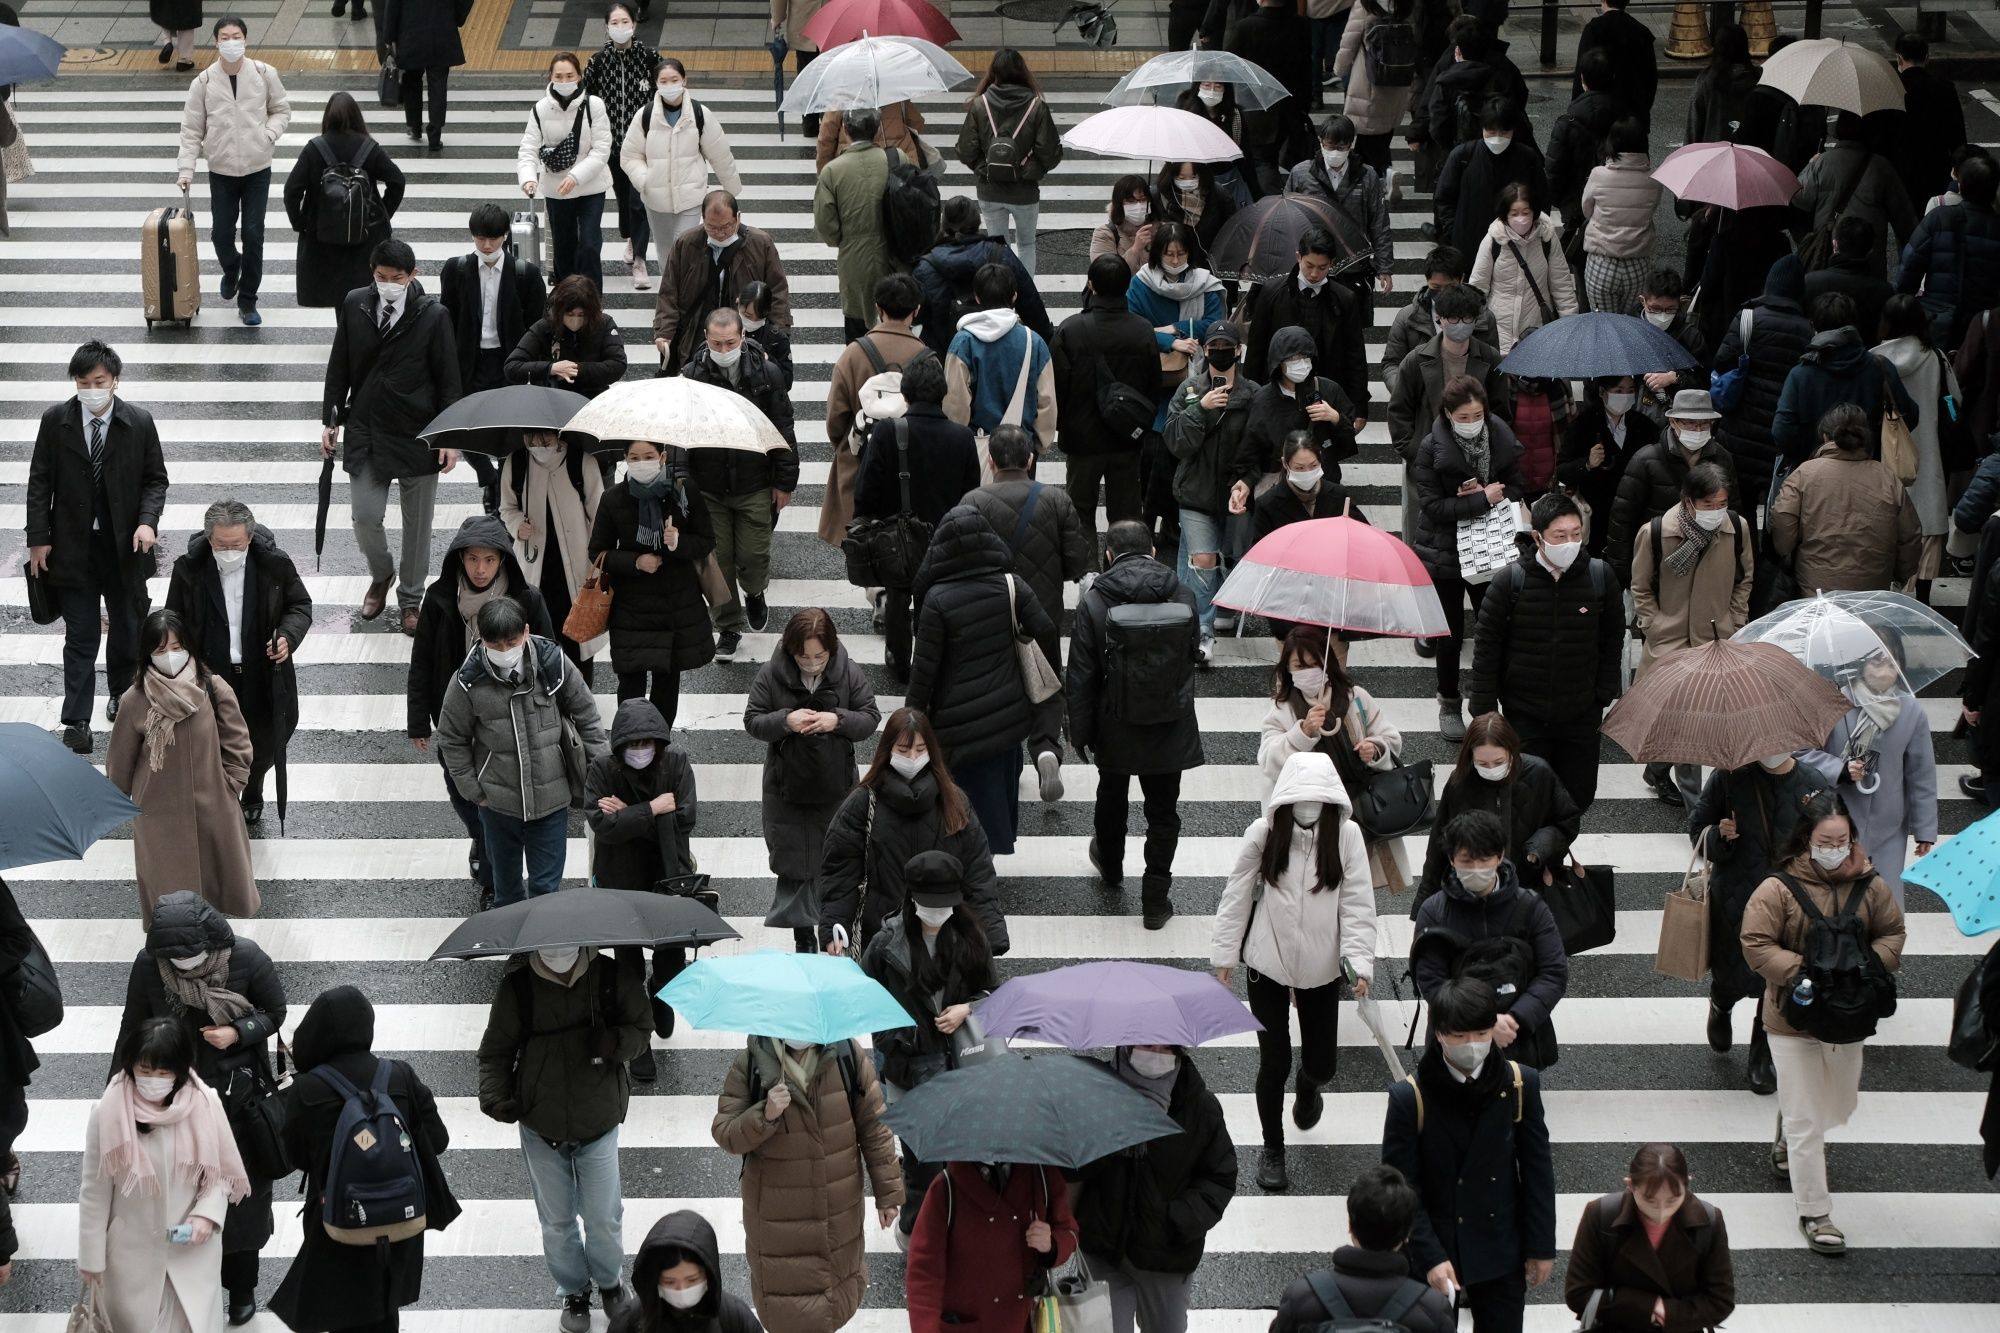 Pedestrians cross a road in Osaka, Japan, on February 13. Japan’s female labour force participation rate lags many other developed economies, but it has seen some gains in recent years. Photo: Bloomberg